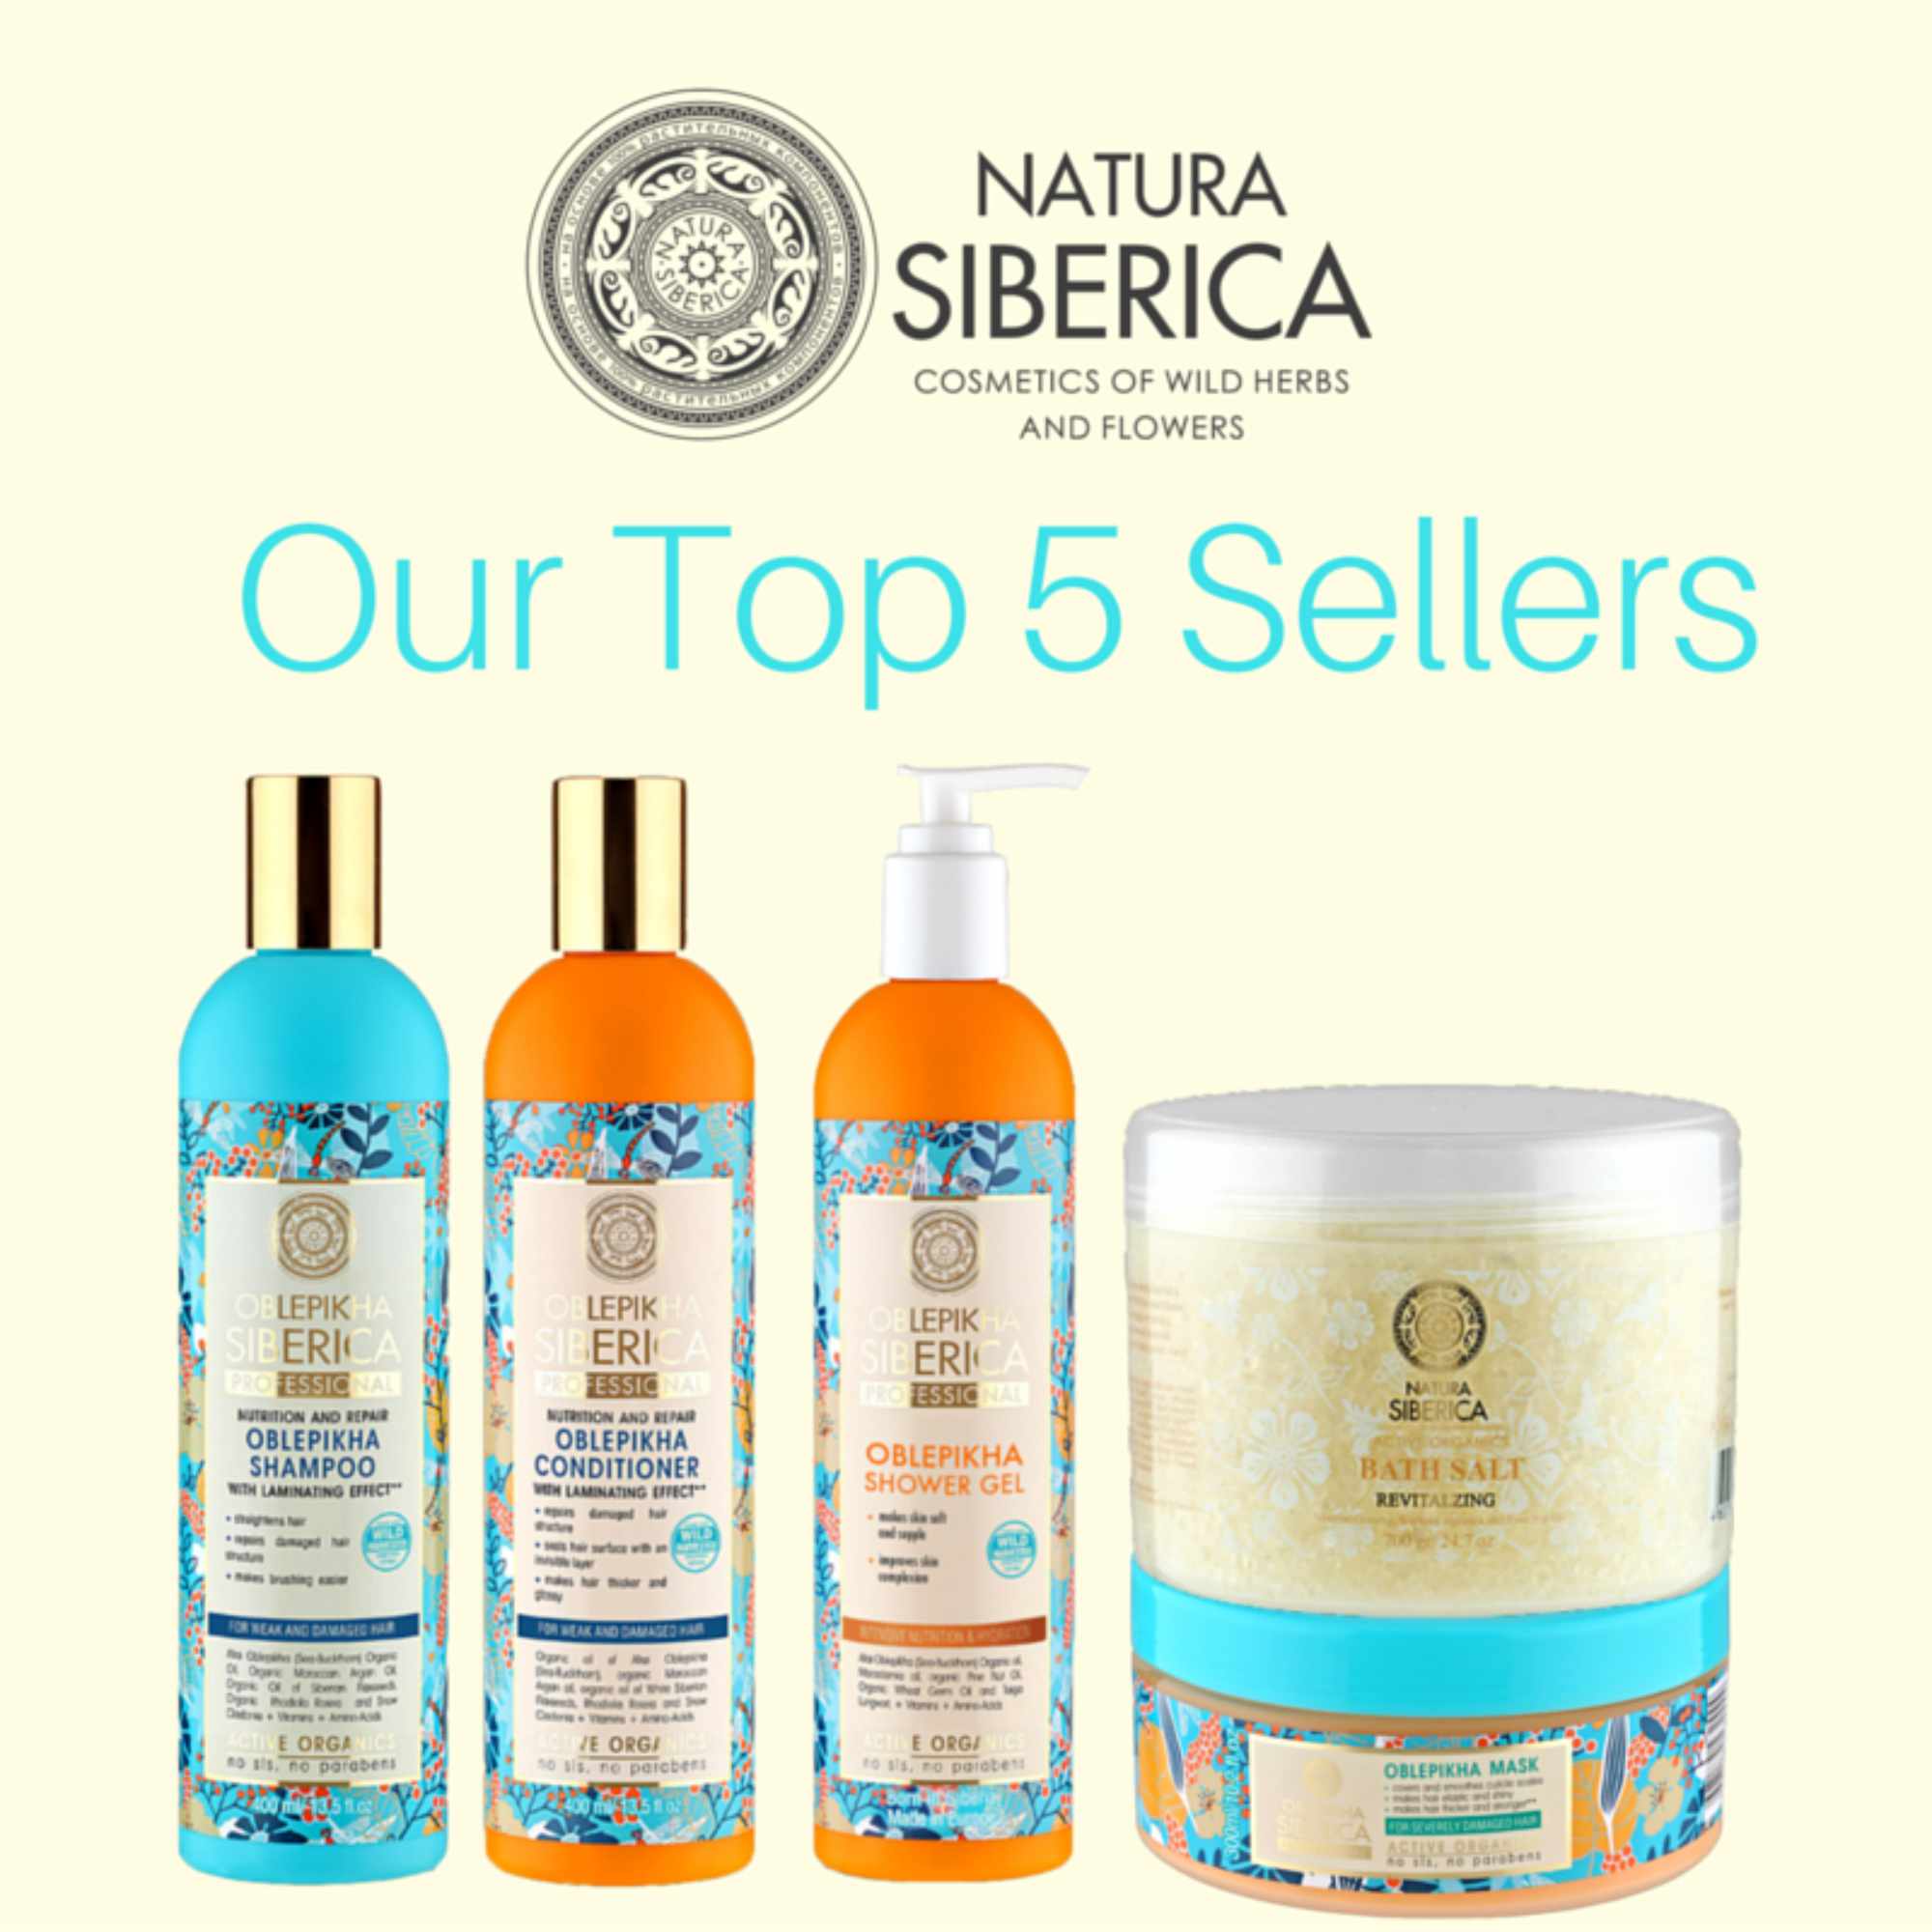 Our Top 5 Selling Products so far